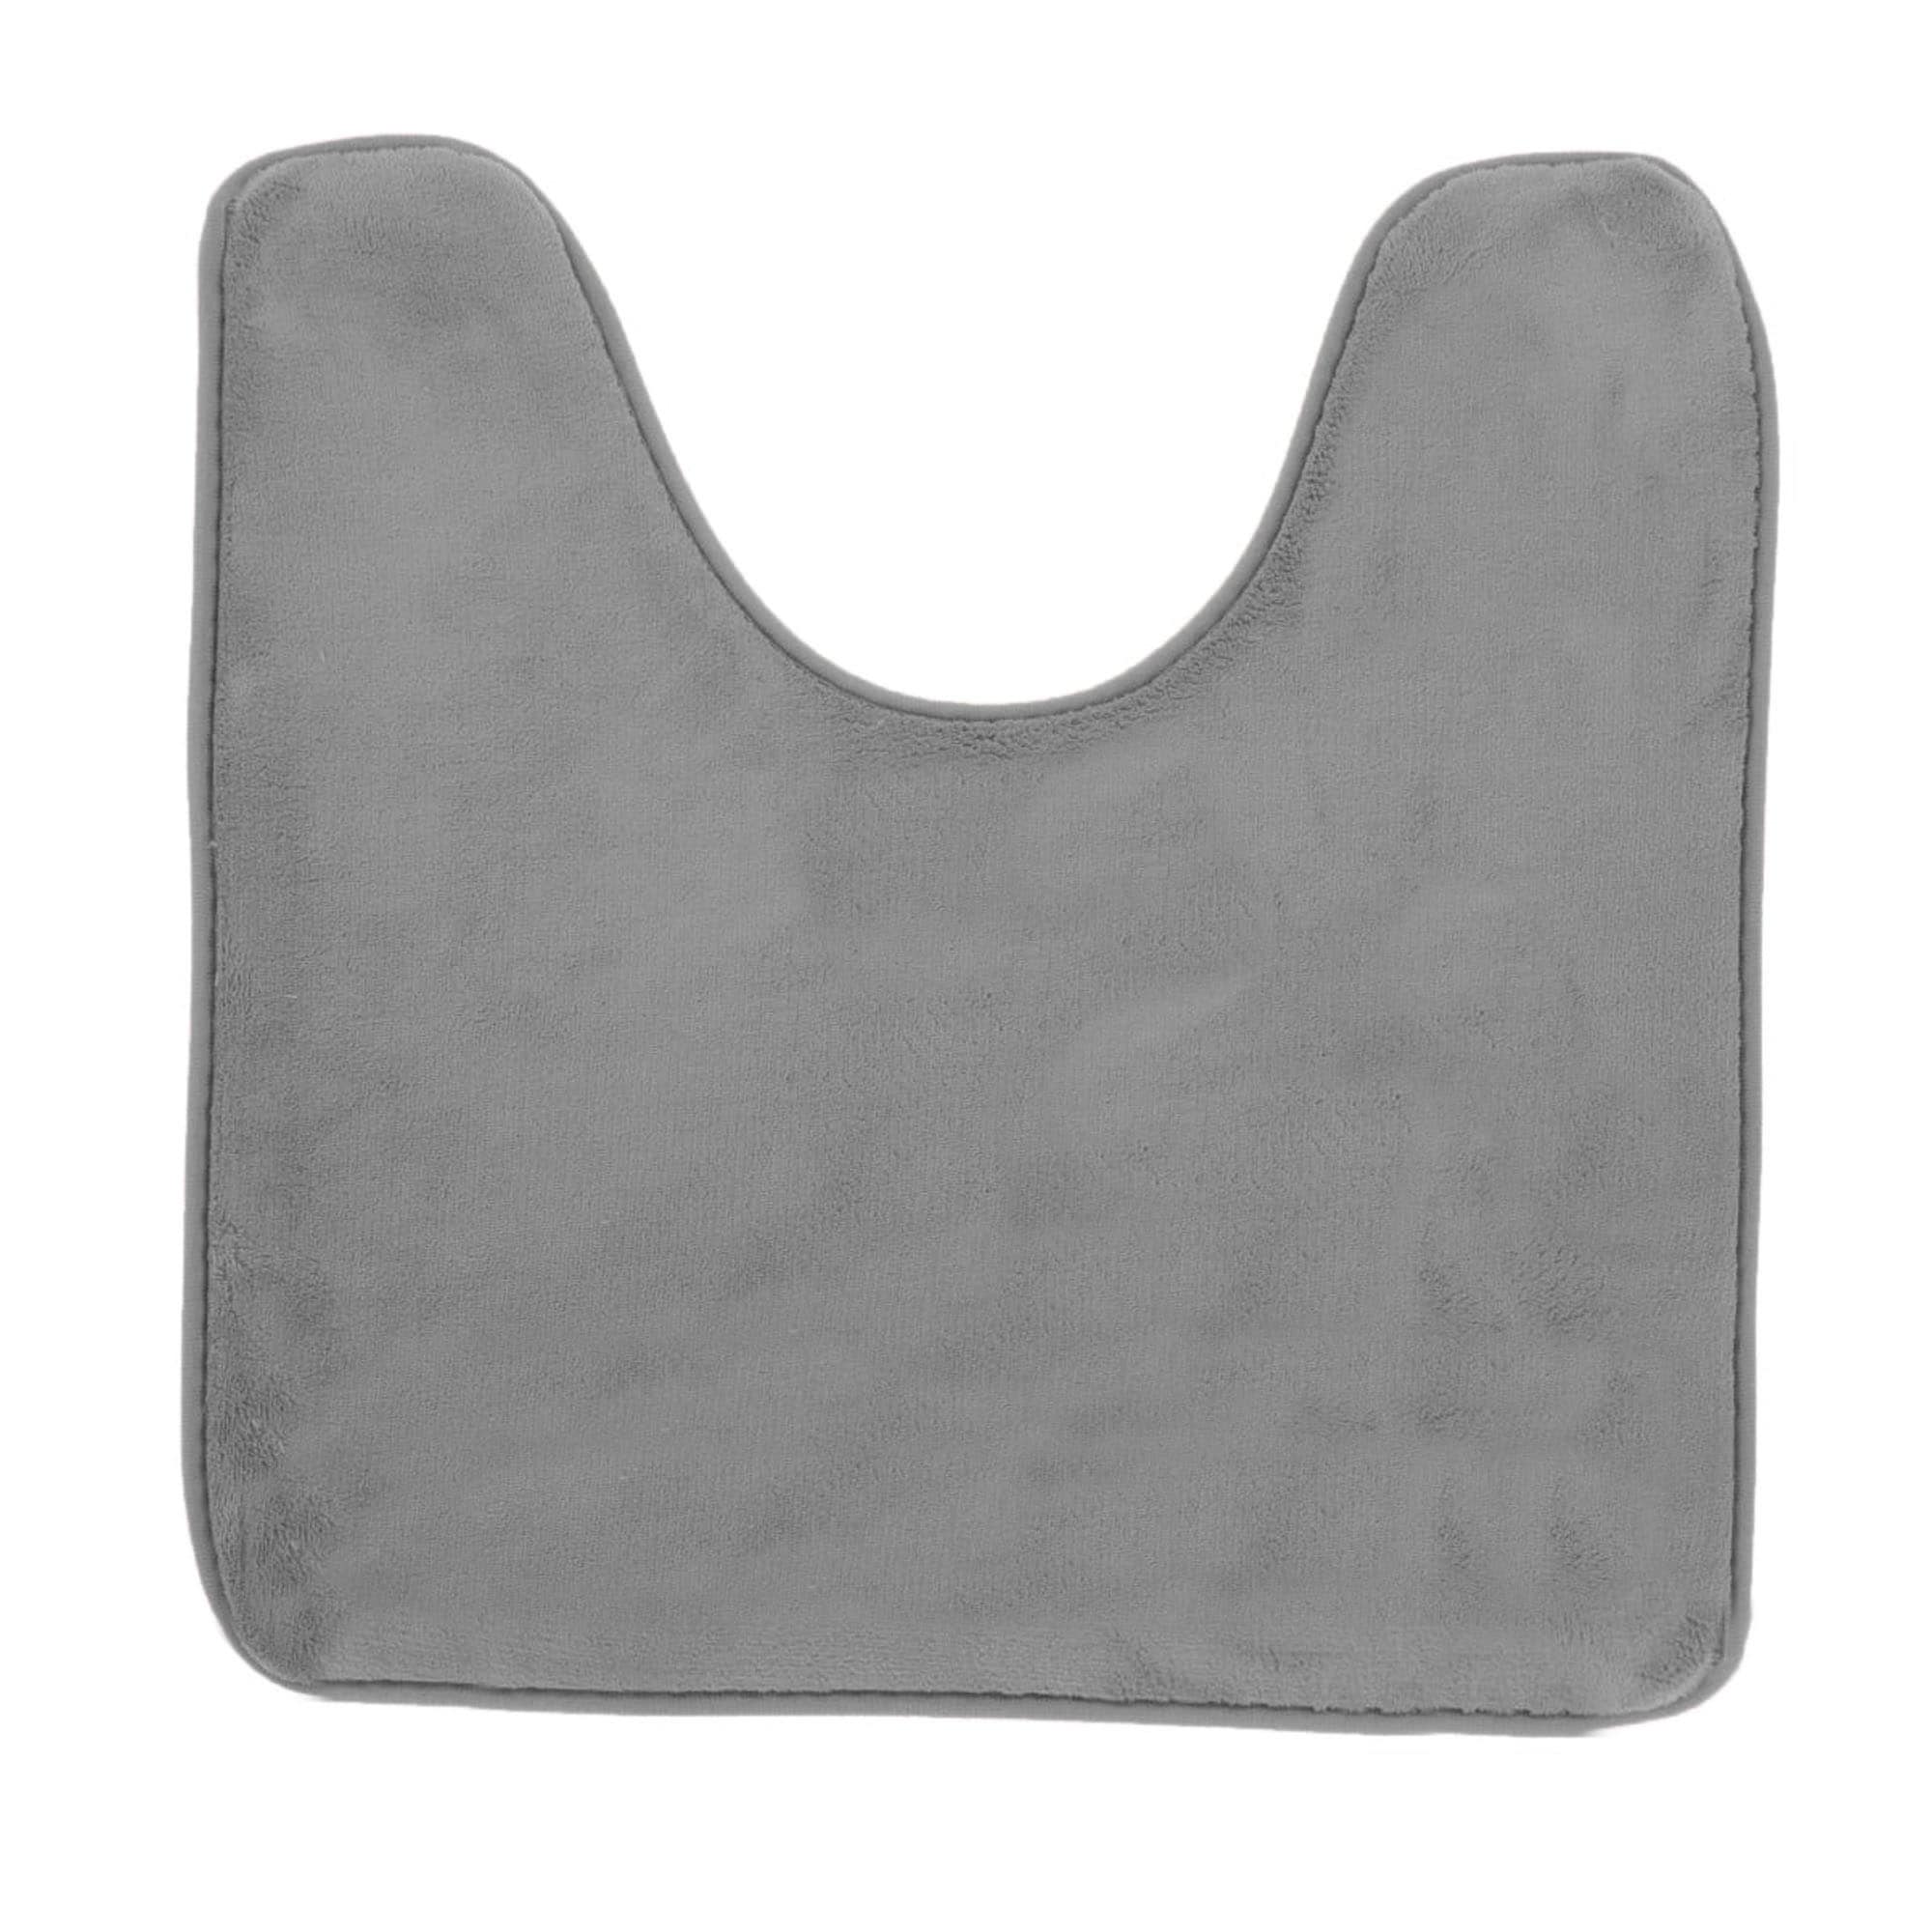 https://ak1.ostkcdn.com/images/products/is/images/direct/5acf3e0d883b82265df7cc7fd013a139af487c3e/Contour-Bath-Rug-Memory-Foam-Mat-White-20%22L-x-20%22W.jpg